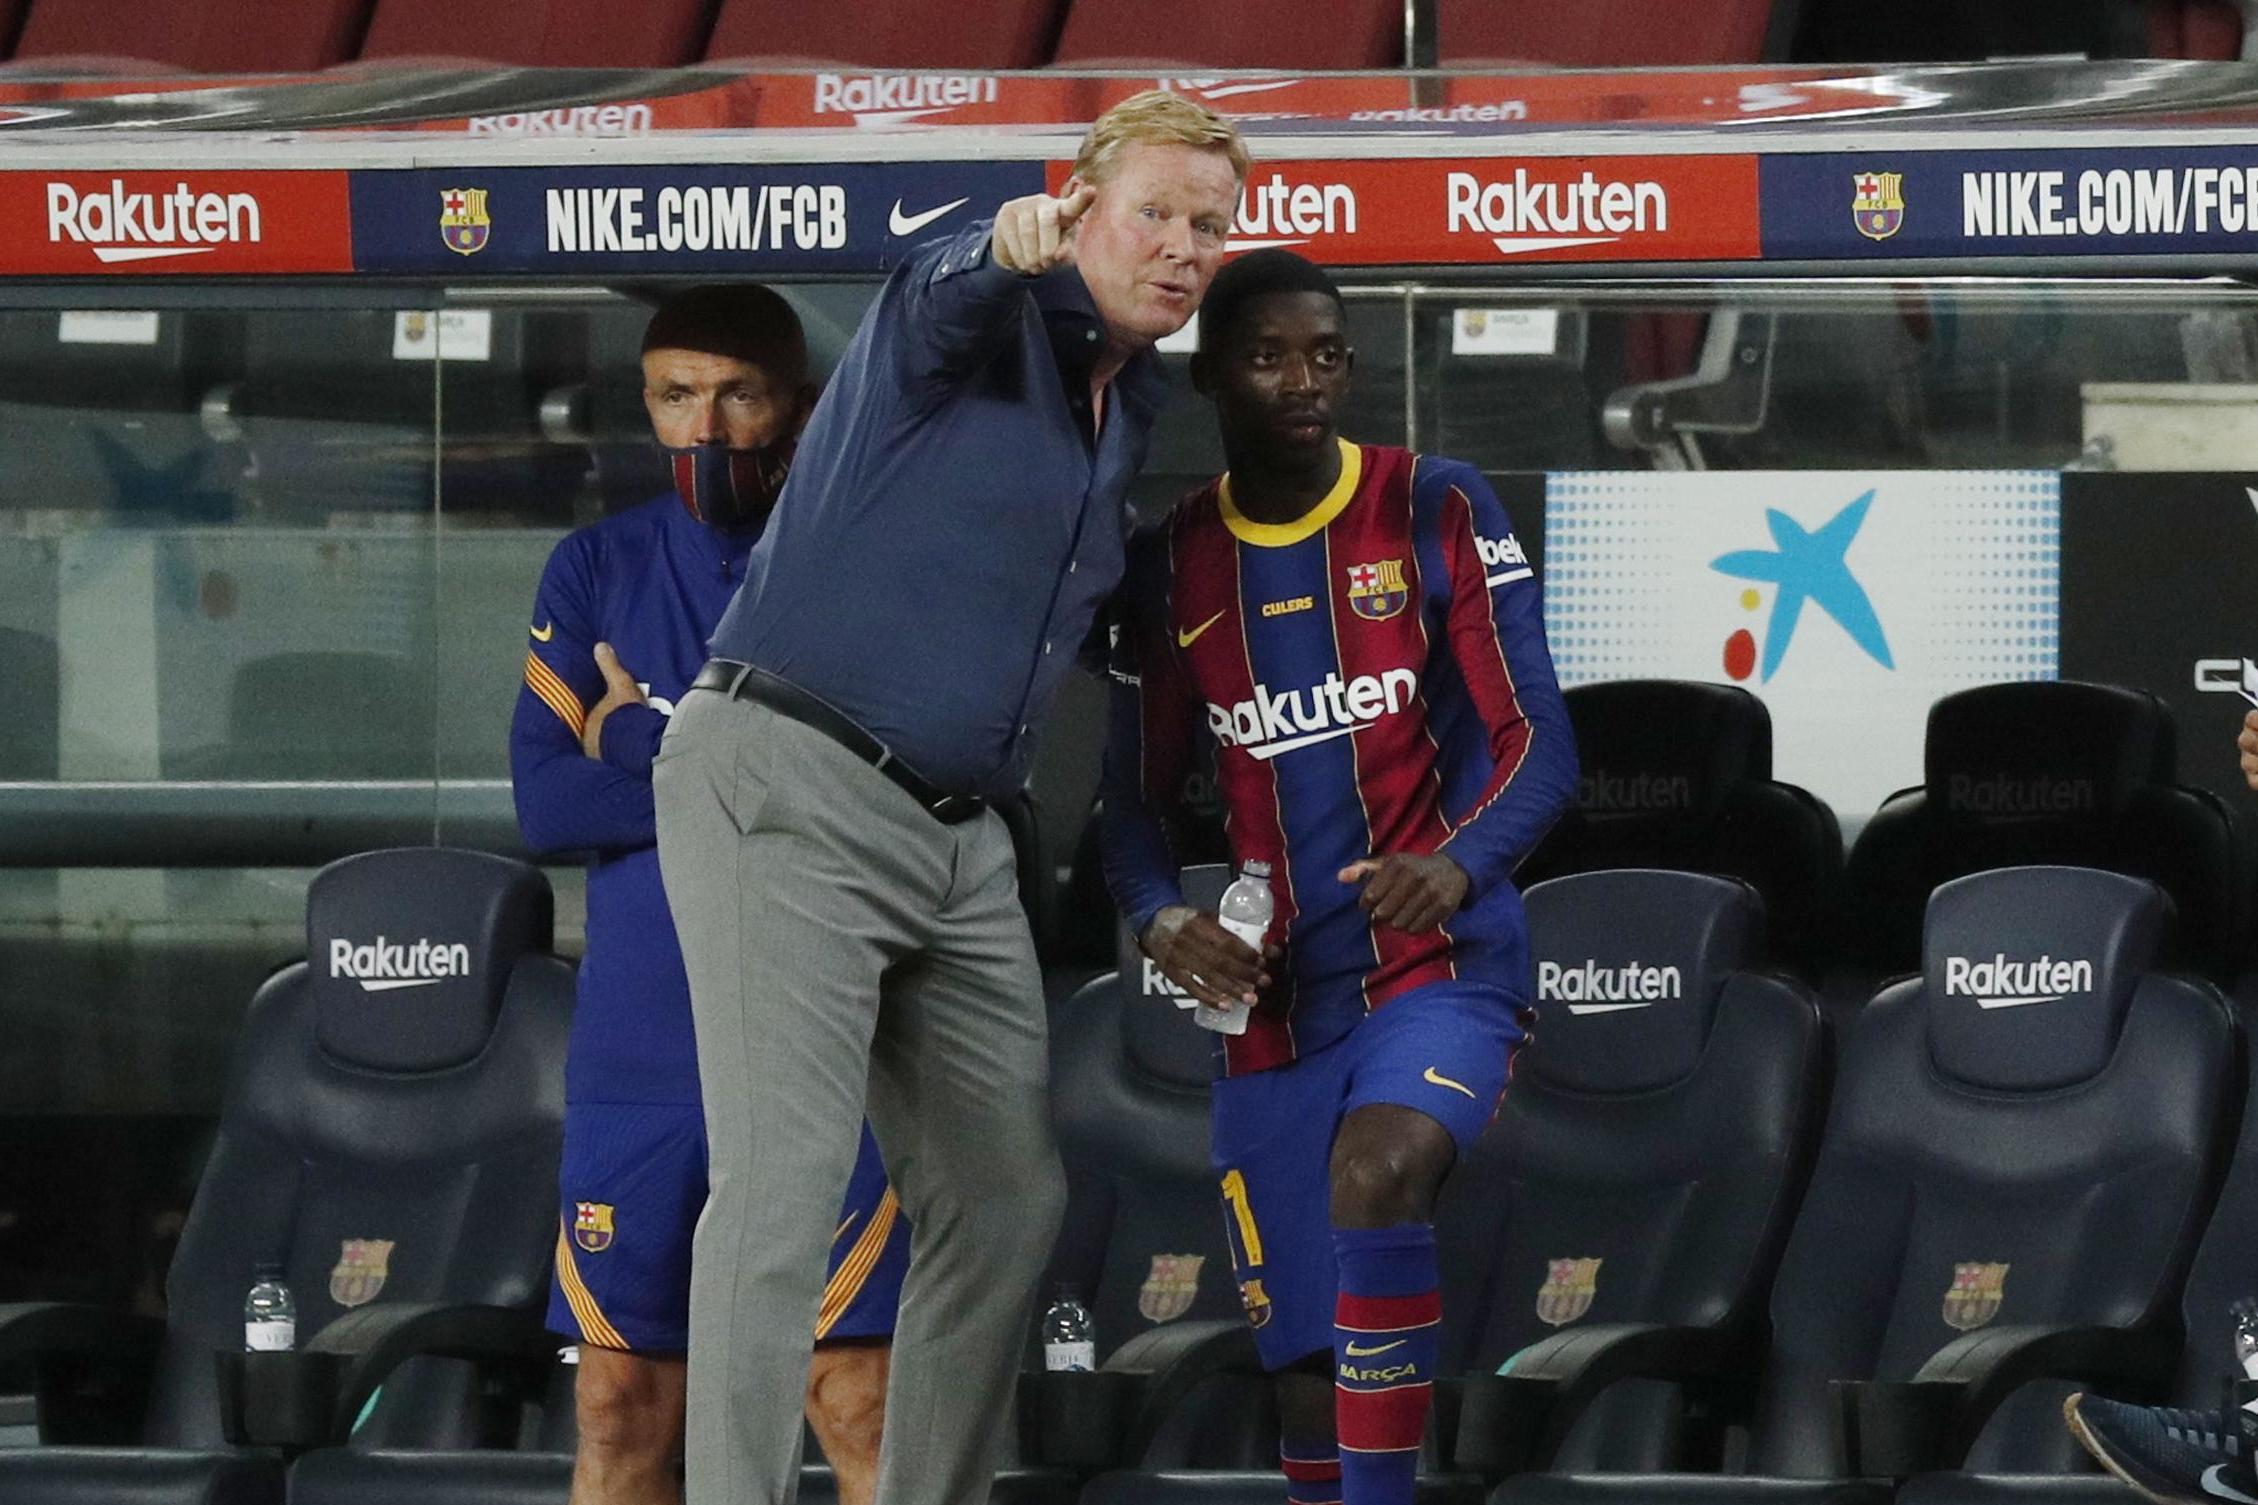 ousmane dembele to manchester united koeman wont rule out deadline day deal as barcelona wait on depay